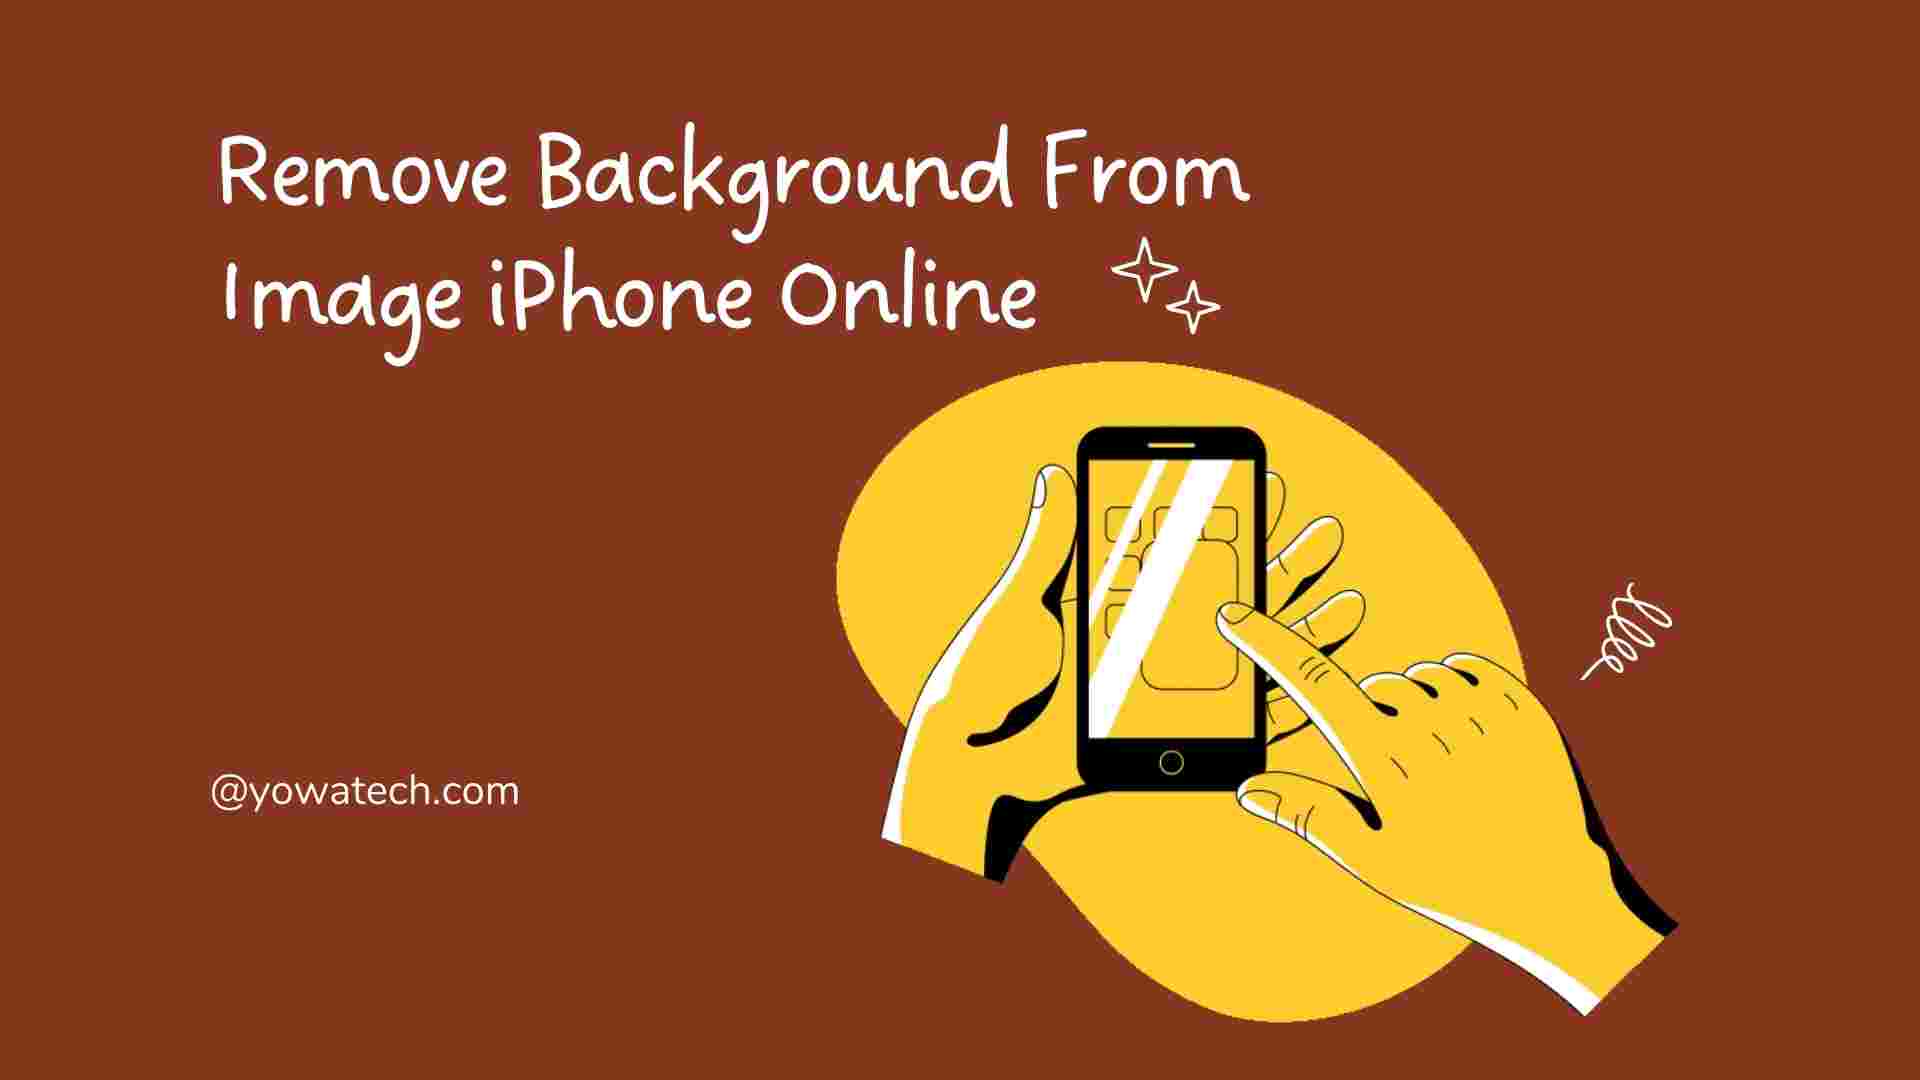 How To Remove Background From Image iPhone Online - Yowatech